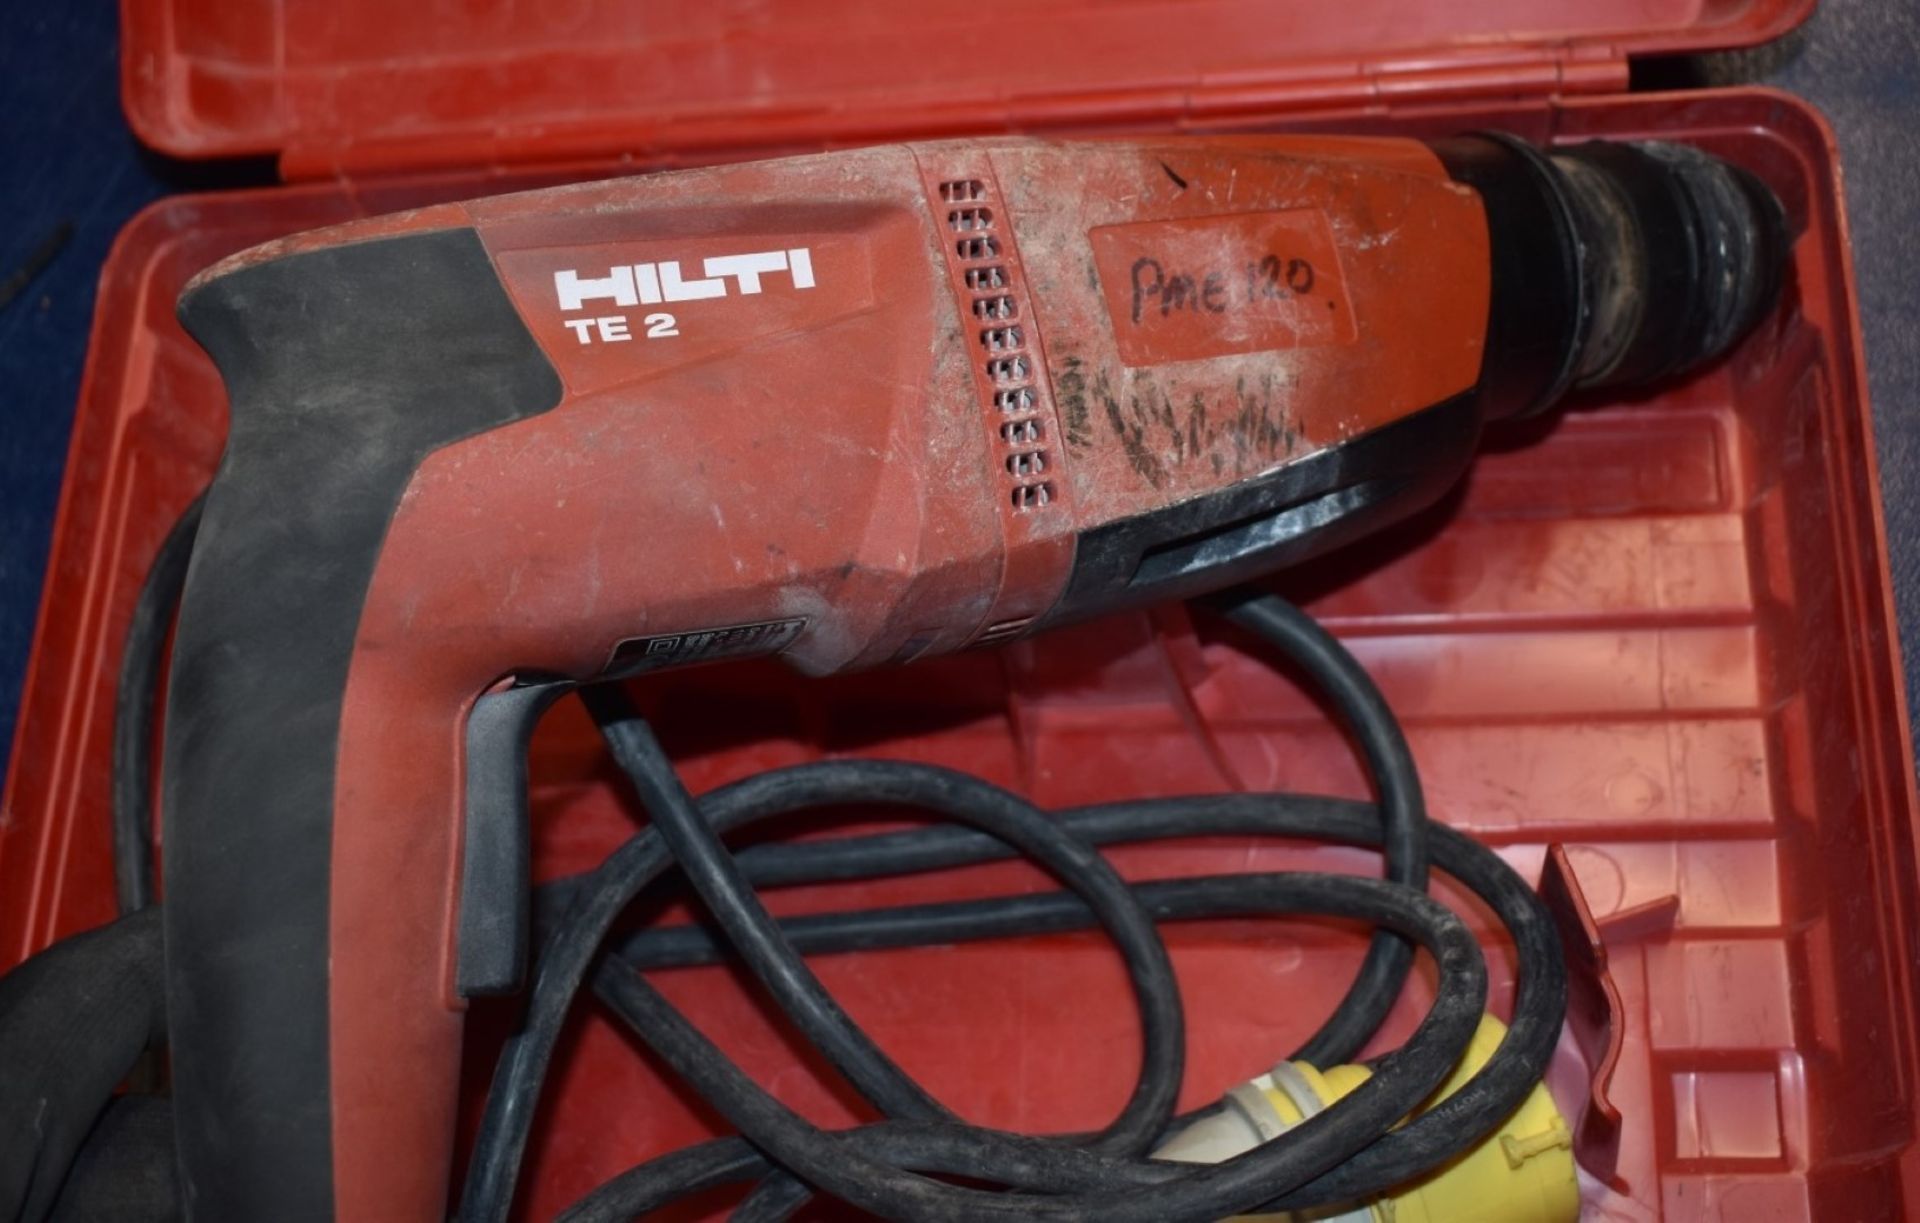 1 x Hilti TE 2 110v Rotary Hammer Drill With Carry Case PME161 - Image 4 of 5